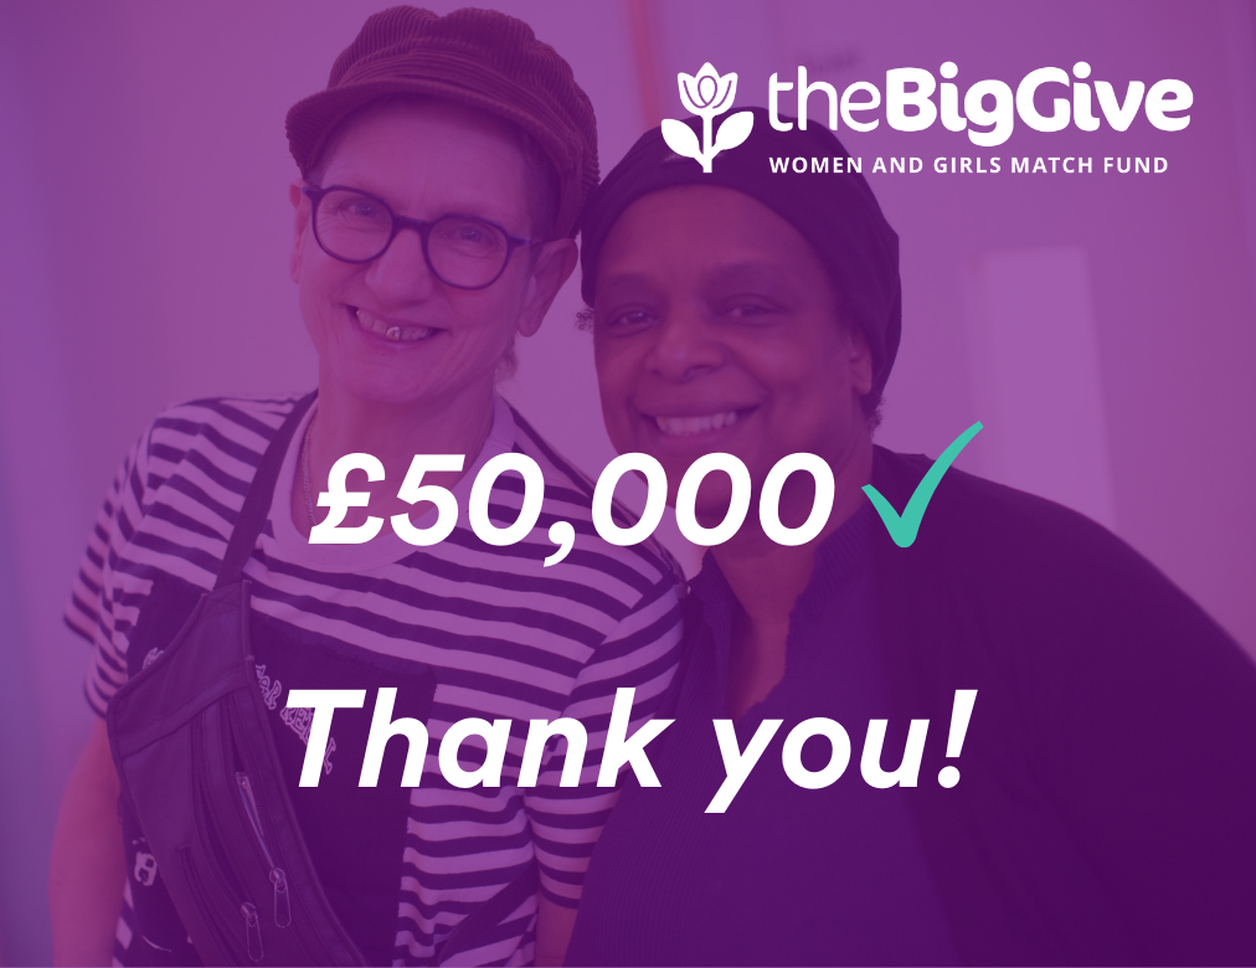 a photo of two clean break members smiling at the camera, there is a purple filter on the photo. text over the top reads '£50000, thank you' the big give logo is in the top right corner